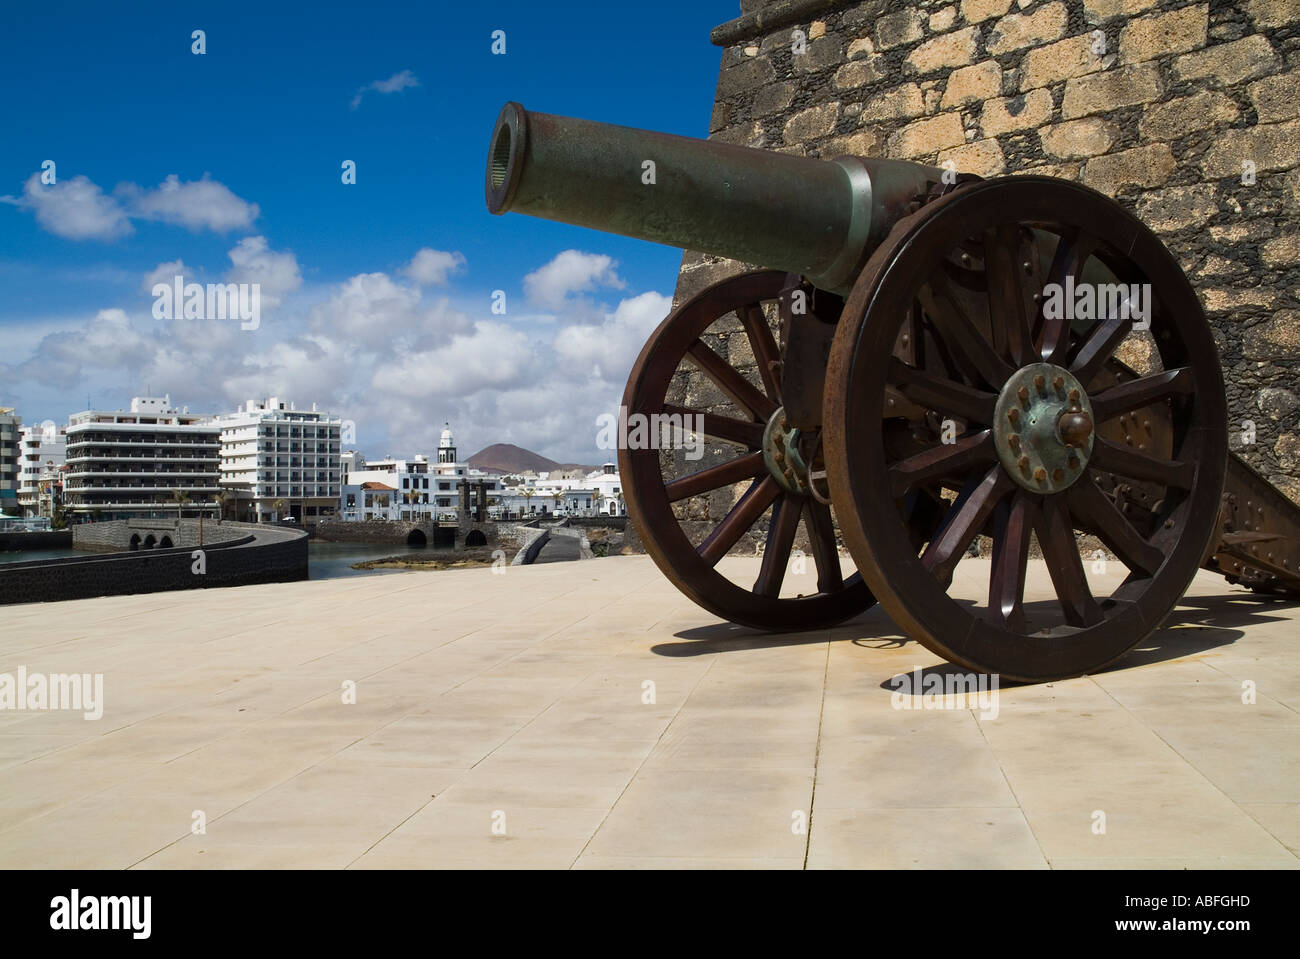 dh Castle San Gabriel ARRECIFE LANZAROTE Cannon by castle walls and bell tower Stock Photo